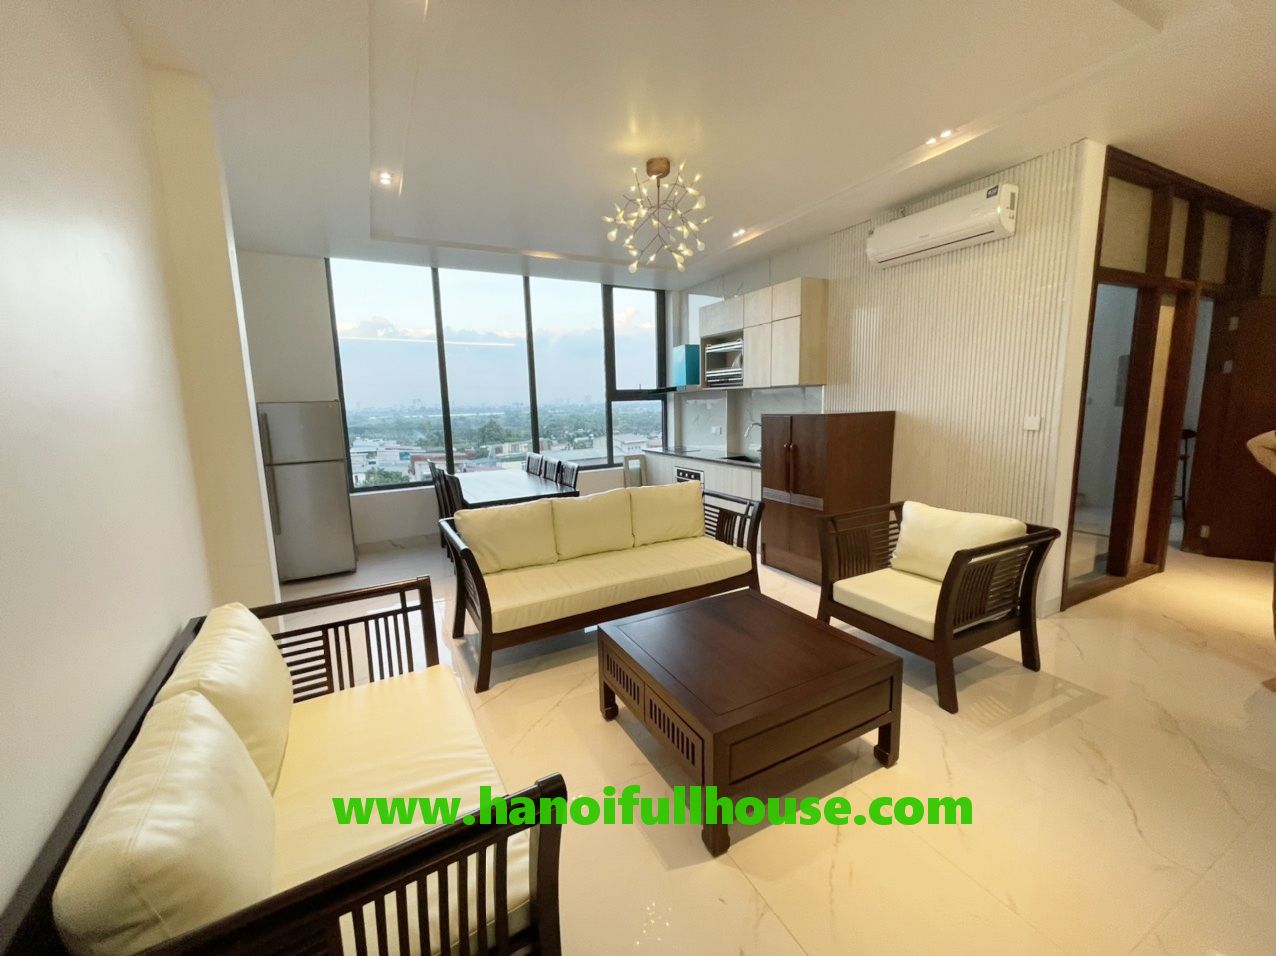 Brand-new & modern 4BR serviced apartment with open view, large balconies